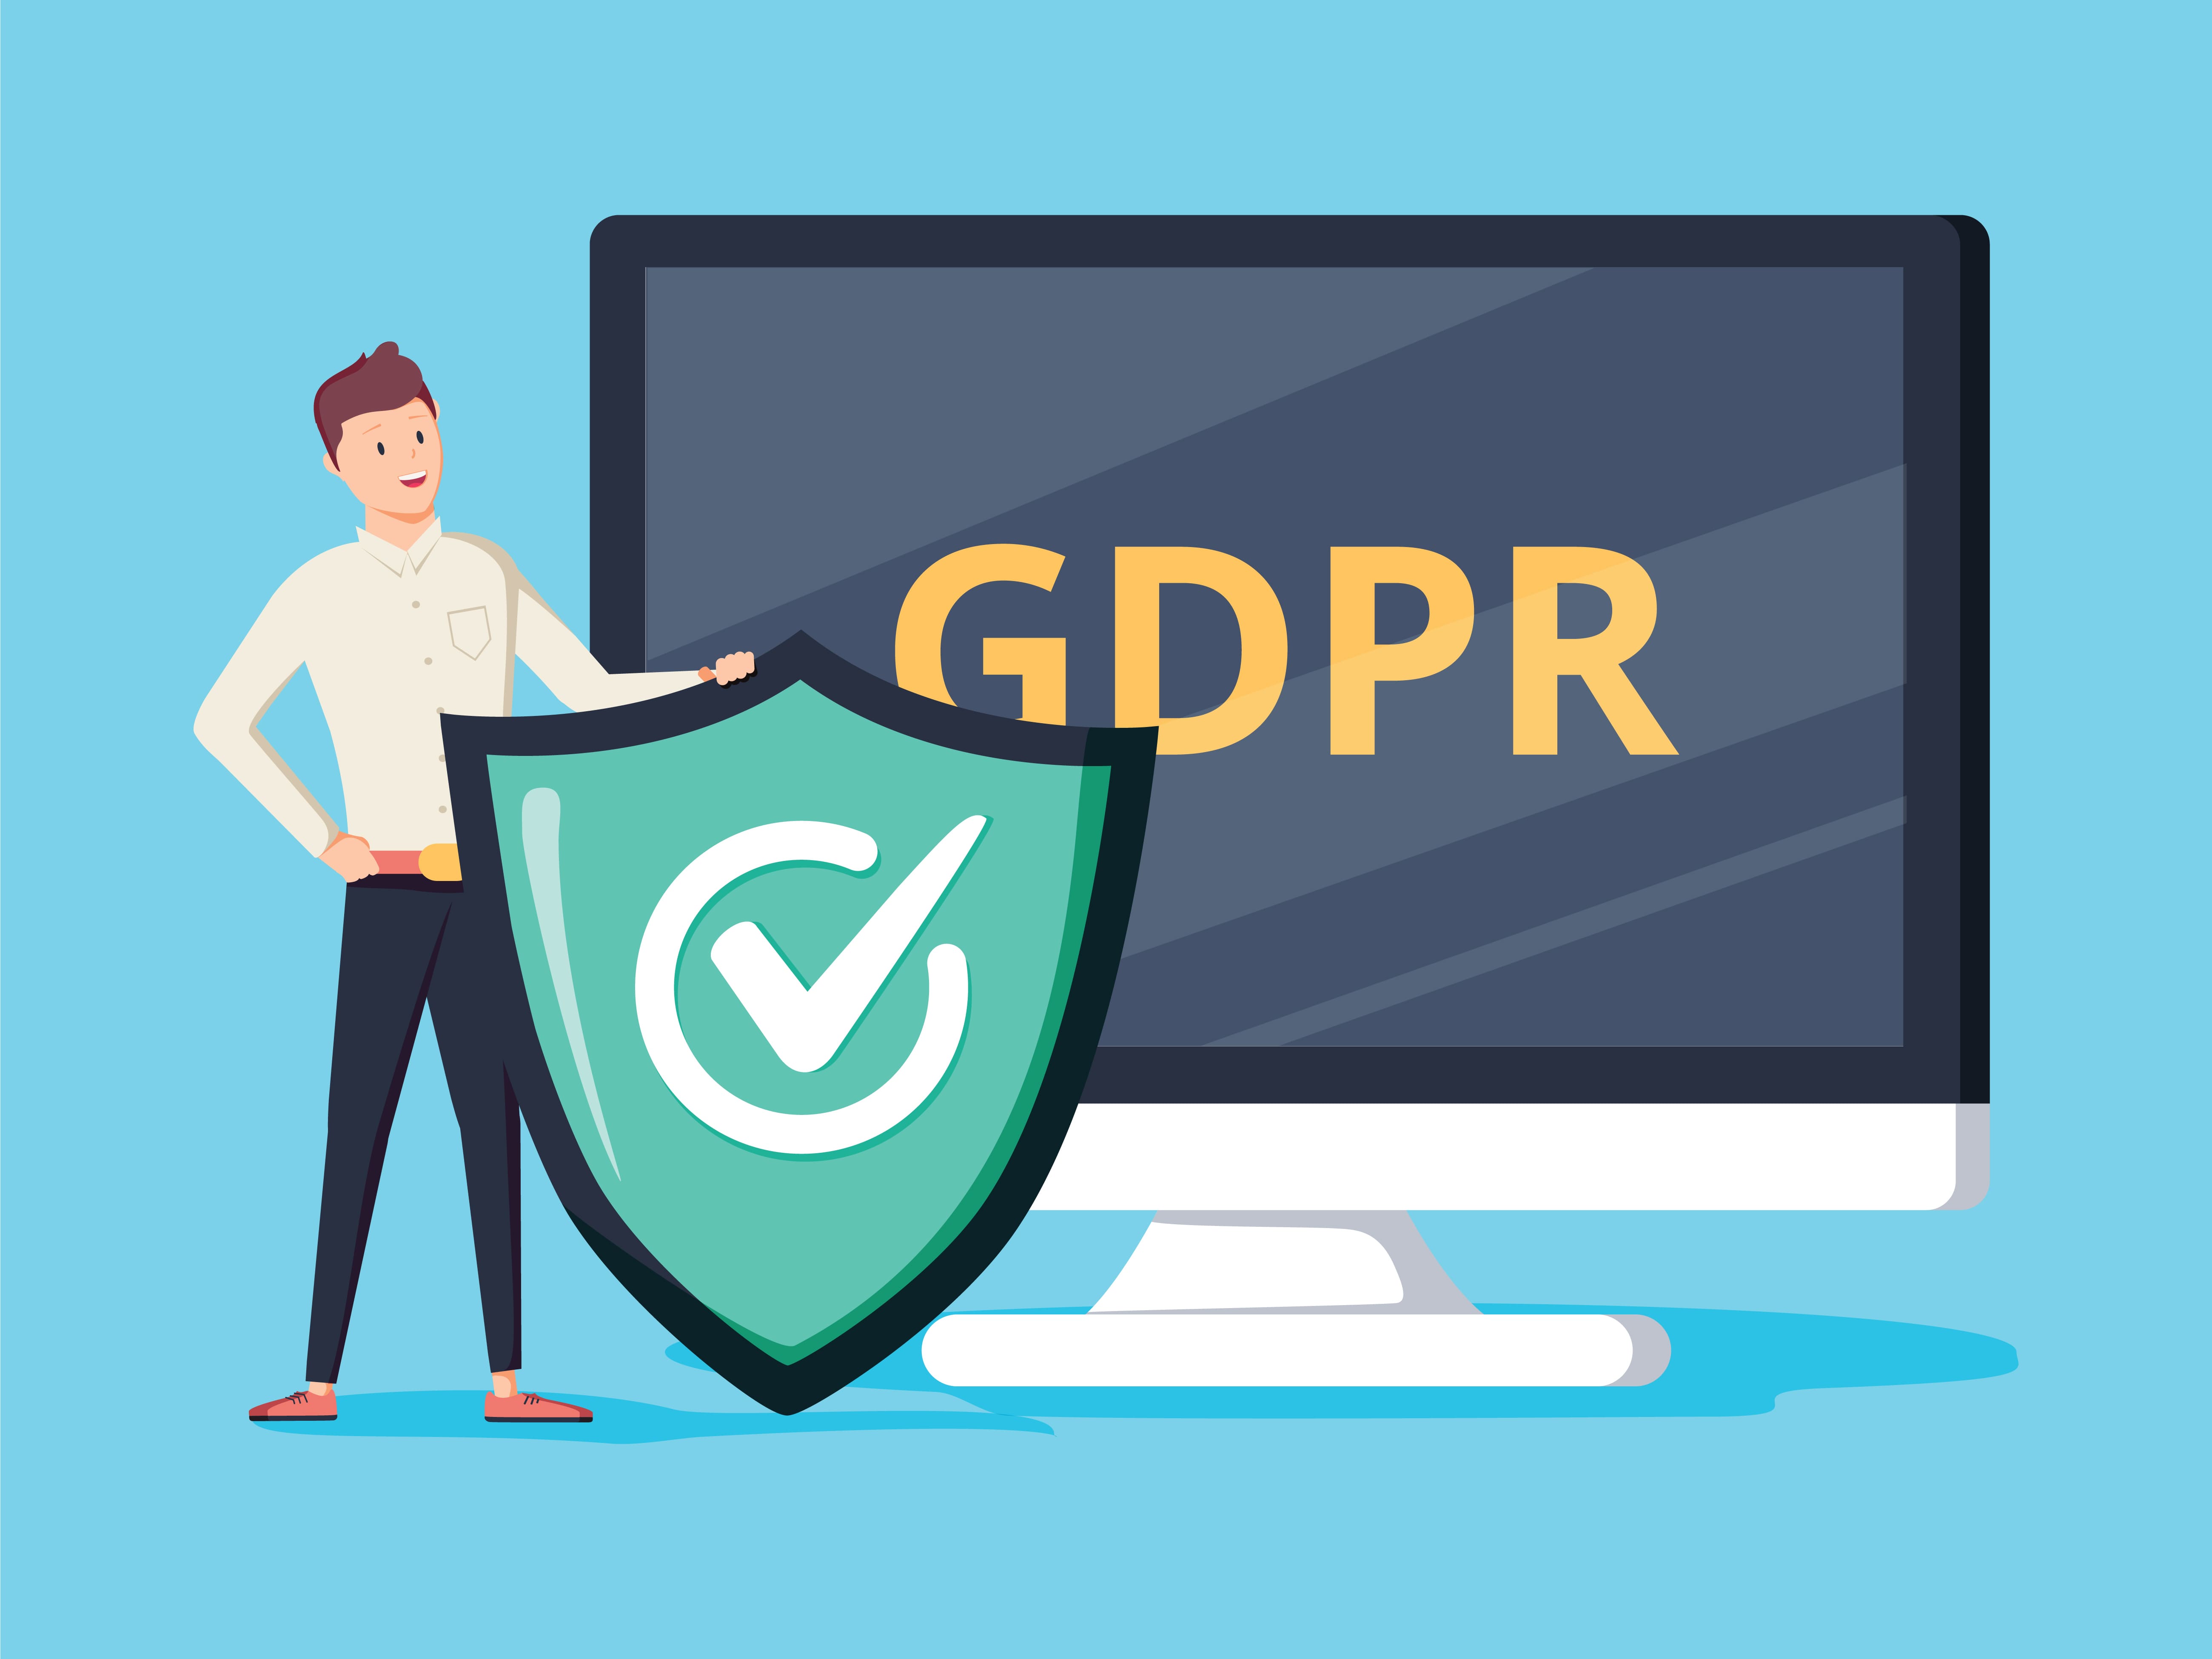 GDPR-GettyImages-970942858 (1)